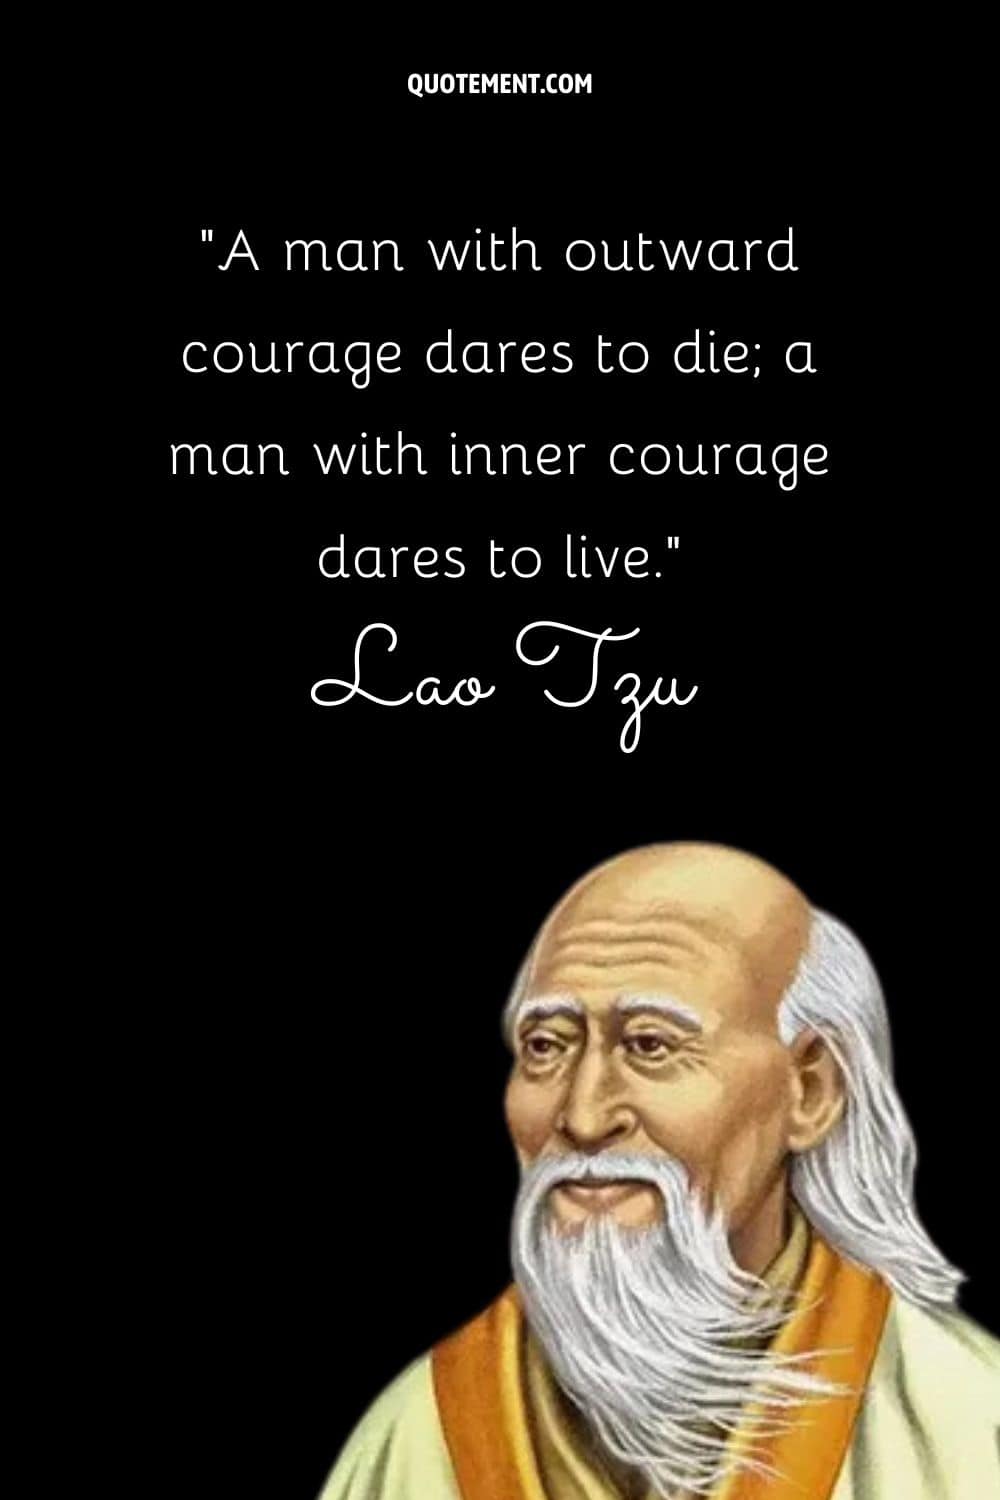 A man with outward courage dares to die; a man with inner courage dares to live